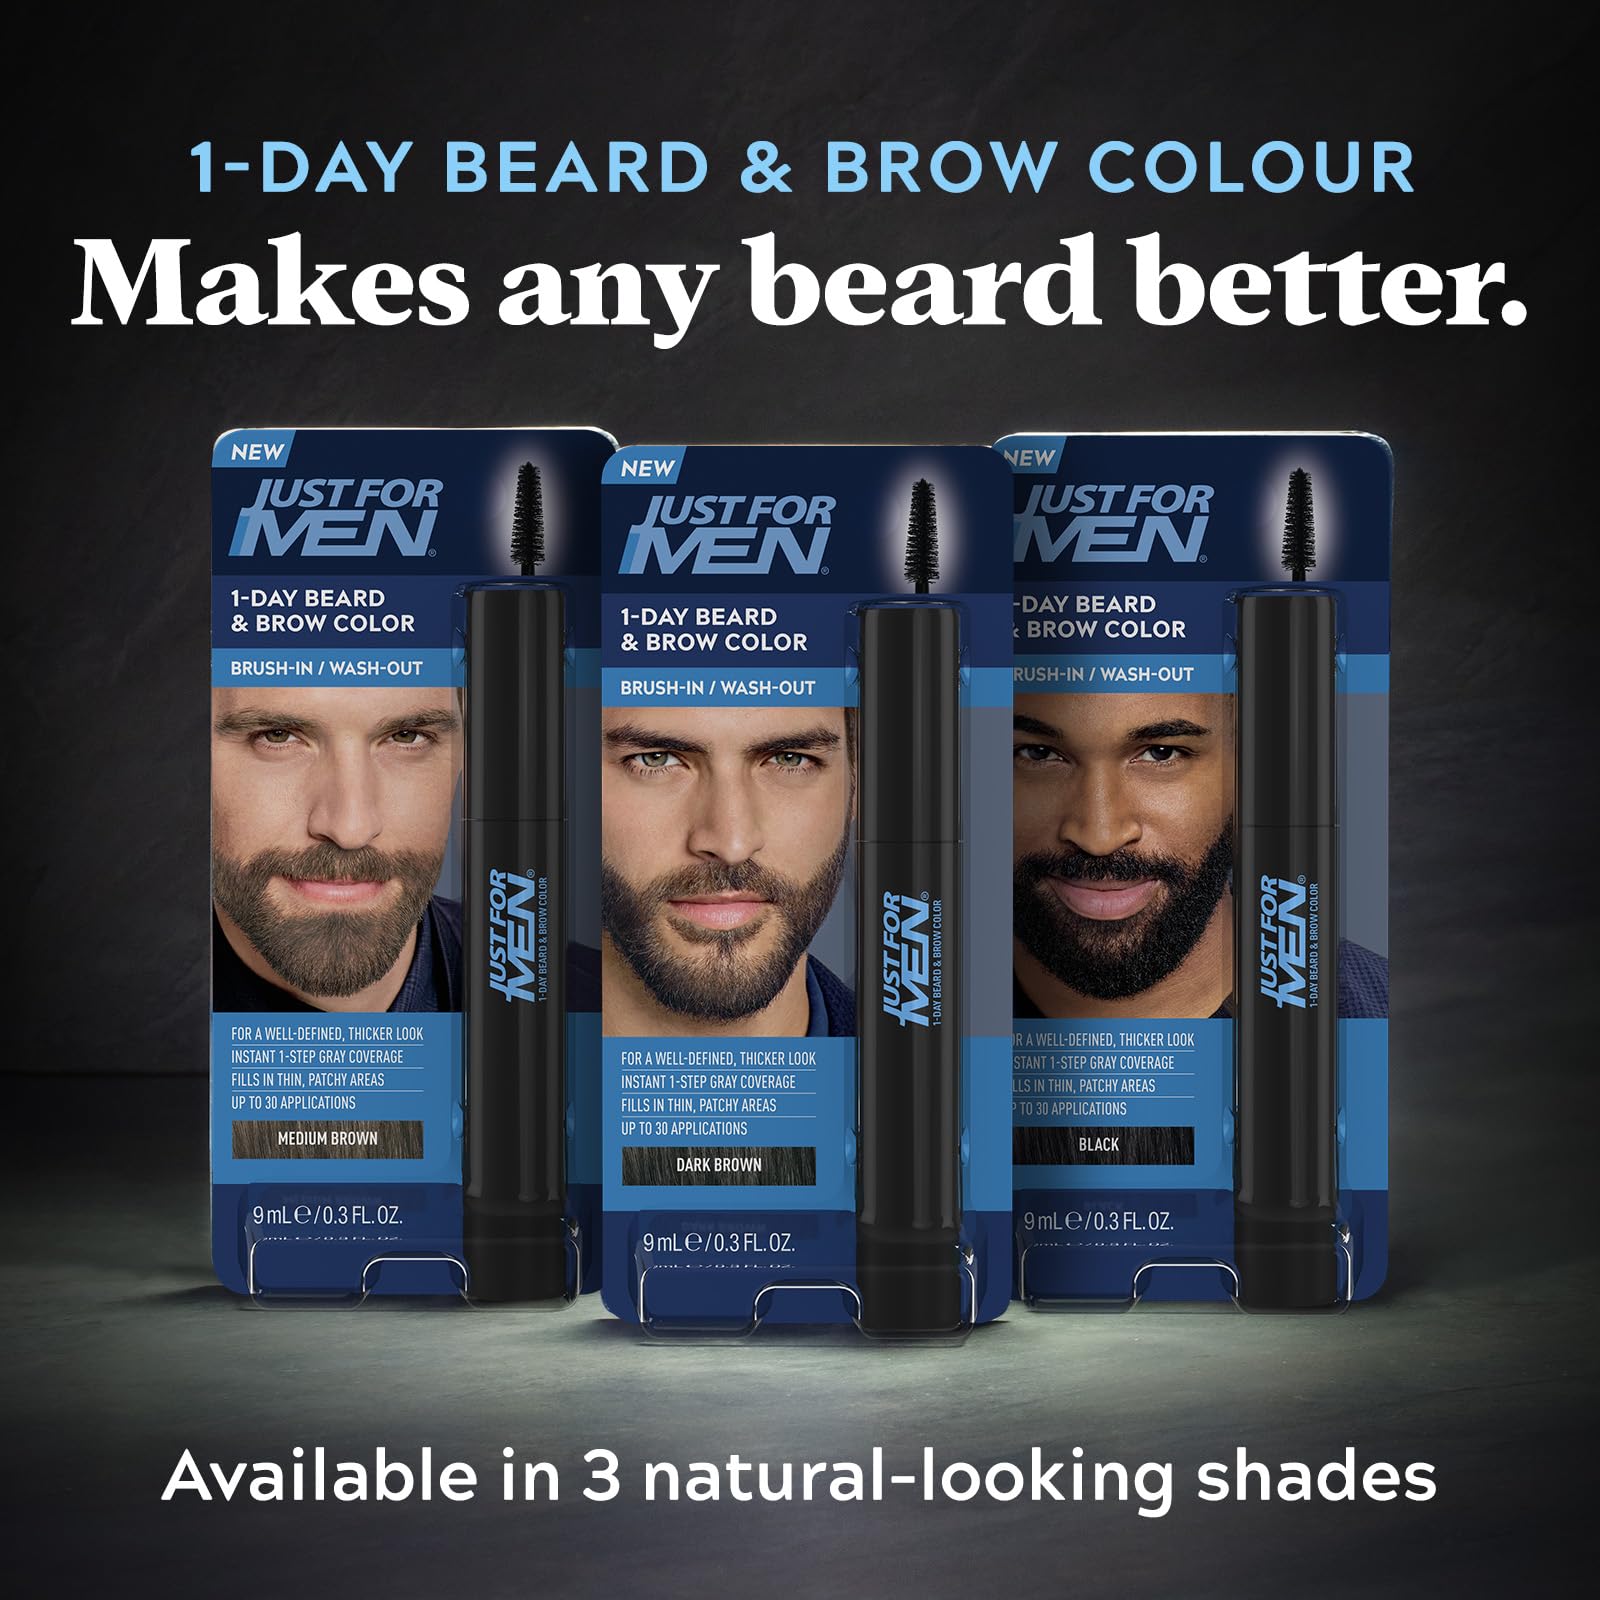 Just for Men 1-Day Beard & Brow Color, Temporary Color for Beard and Eyebrows, For a Fuller, Well-Defined Look, Up to 30 Applications, Medium Brown